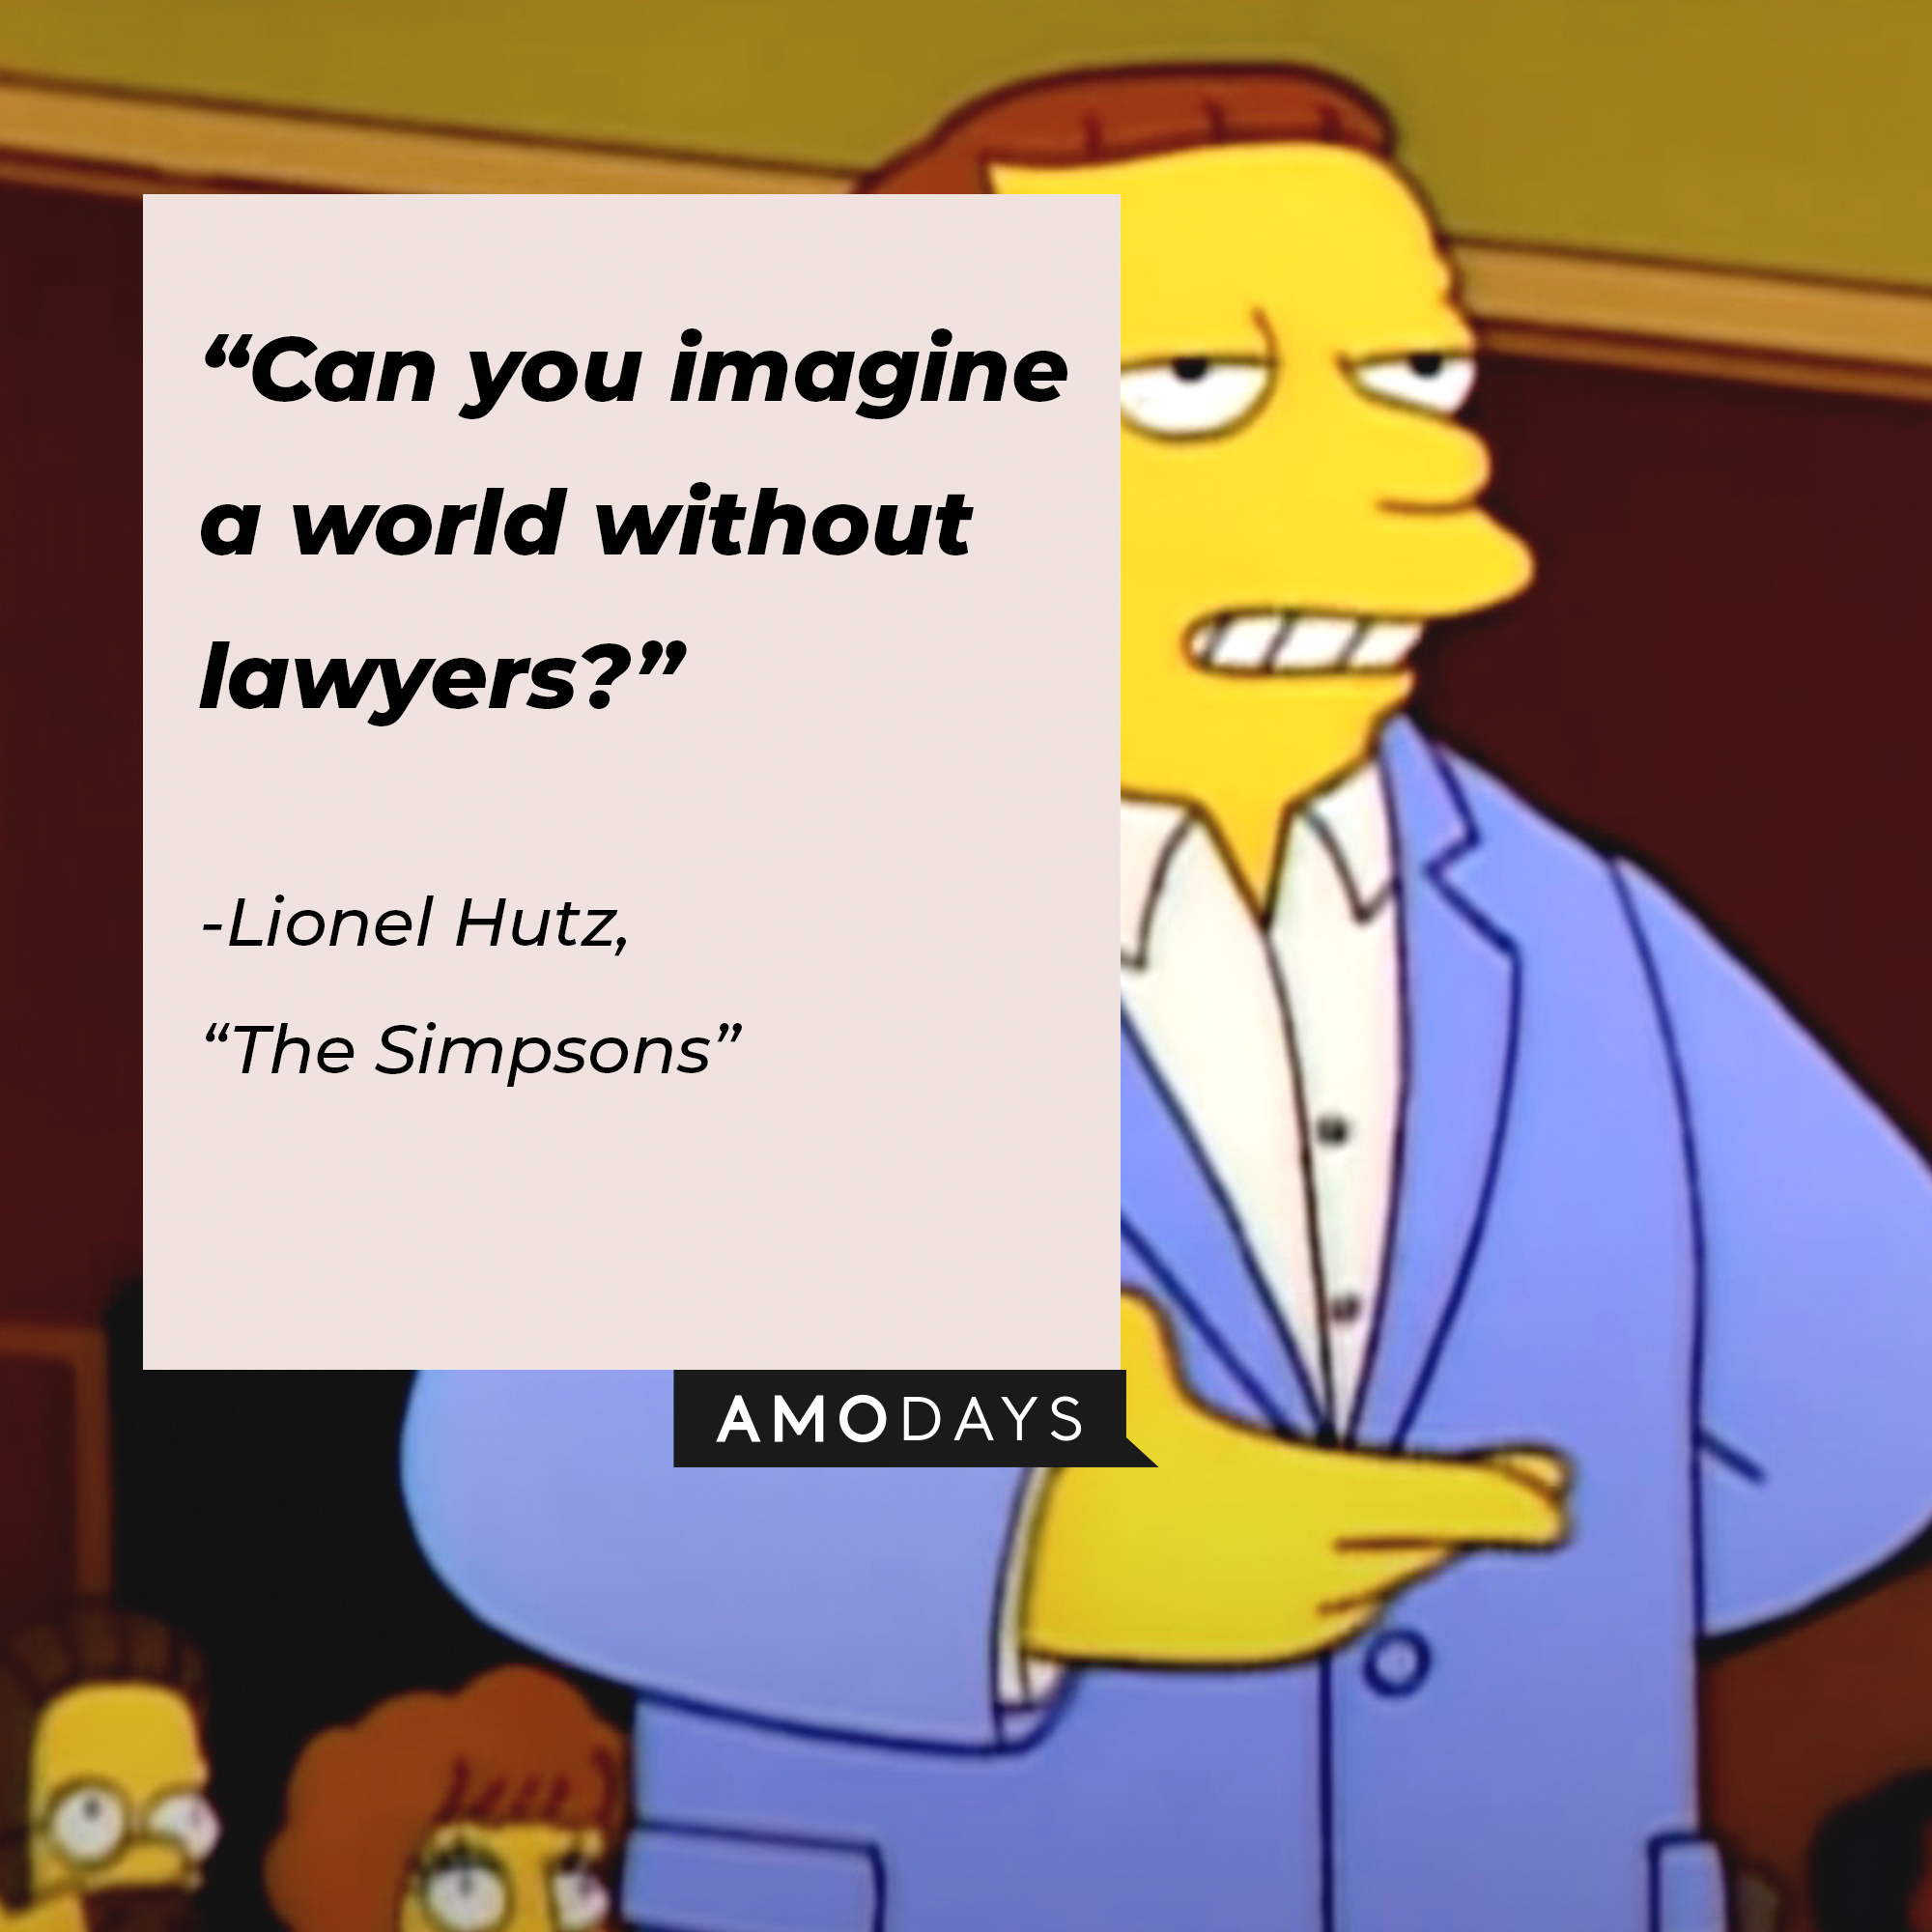 Lionel Hutz’s quote from “The Simpsons”: “Can you imagine a world without lawyers?” | Source: facebook.com/TheSimpsons